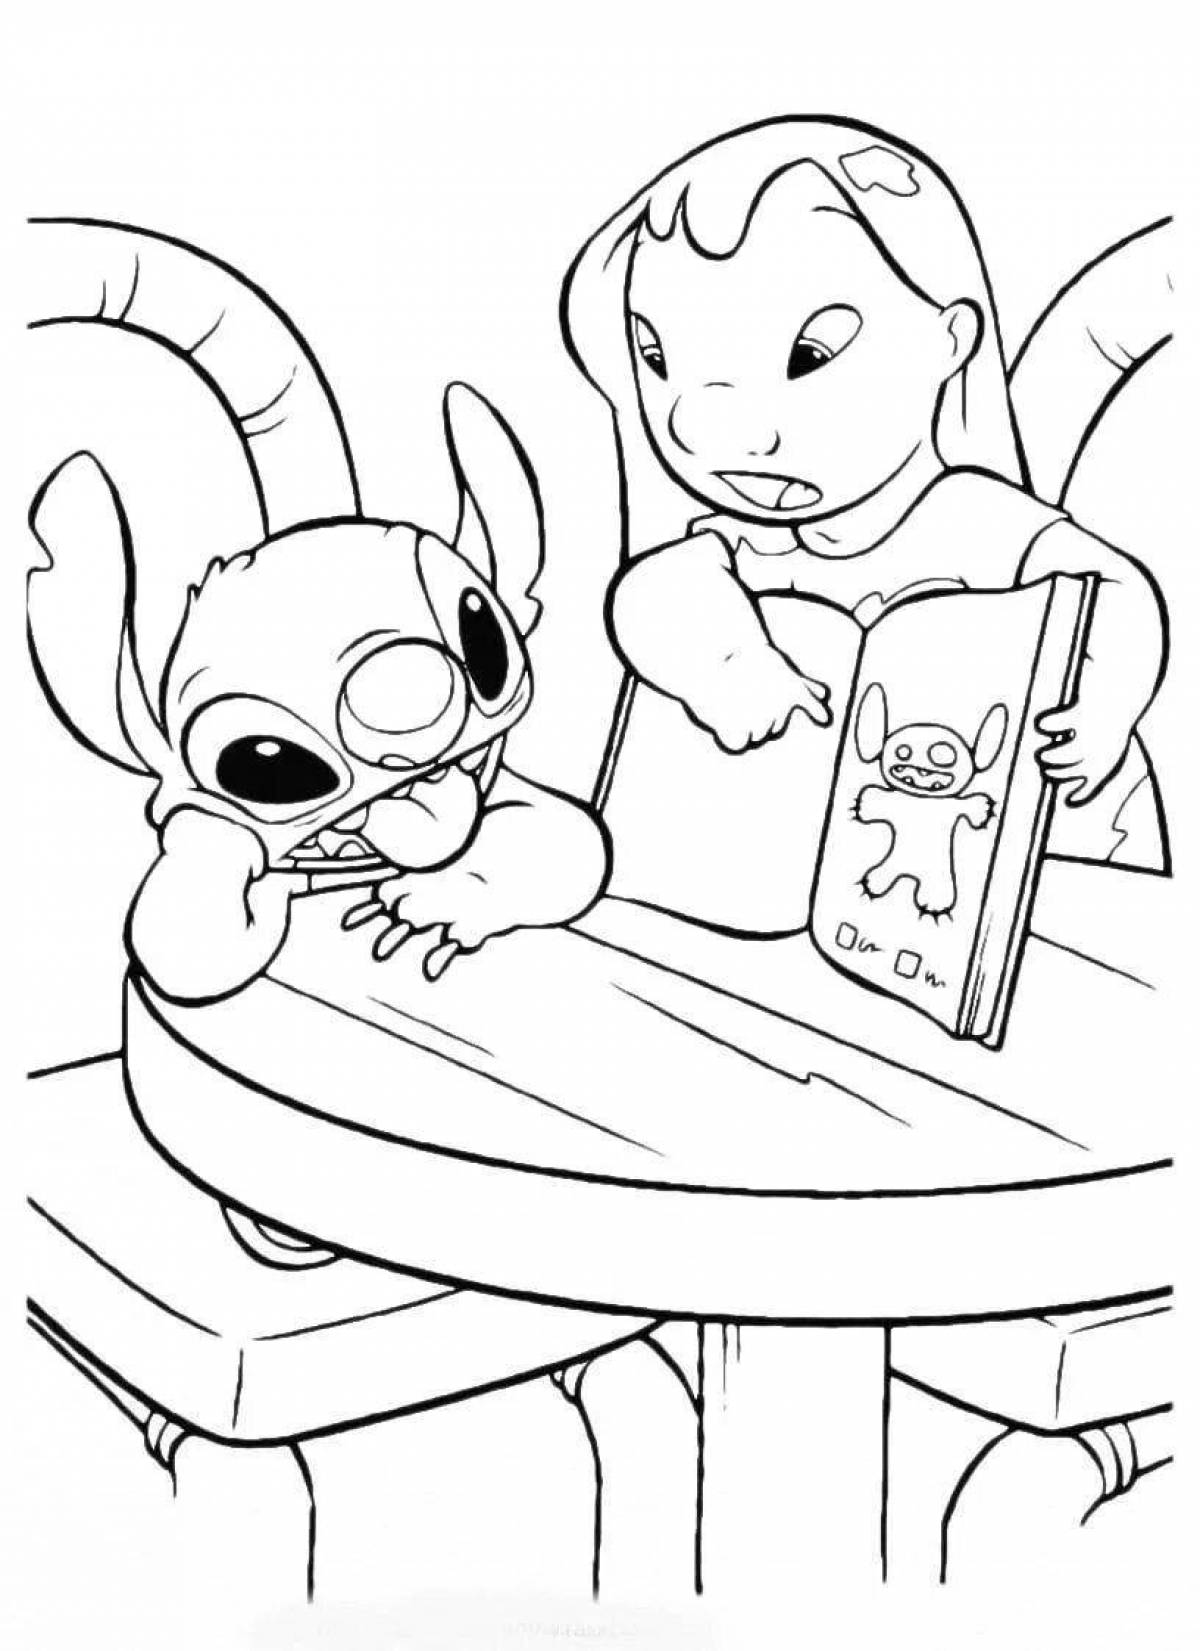 Animated coloring book for girls lilo and stitch